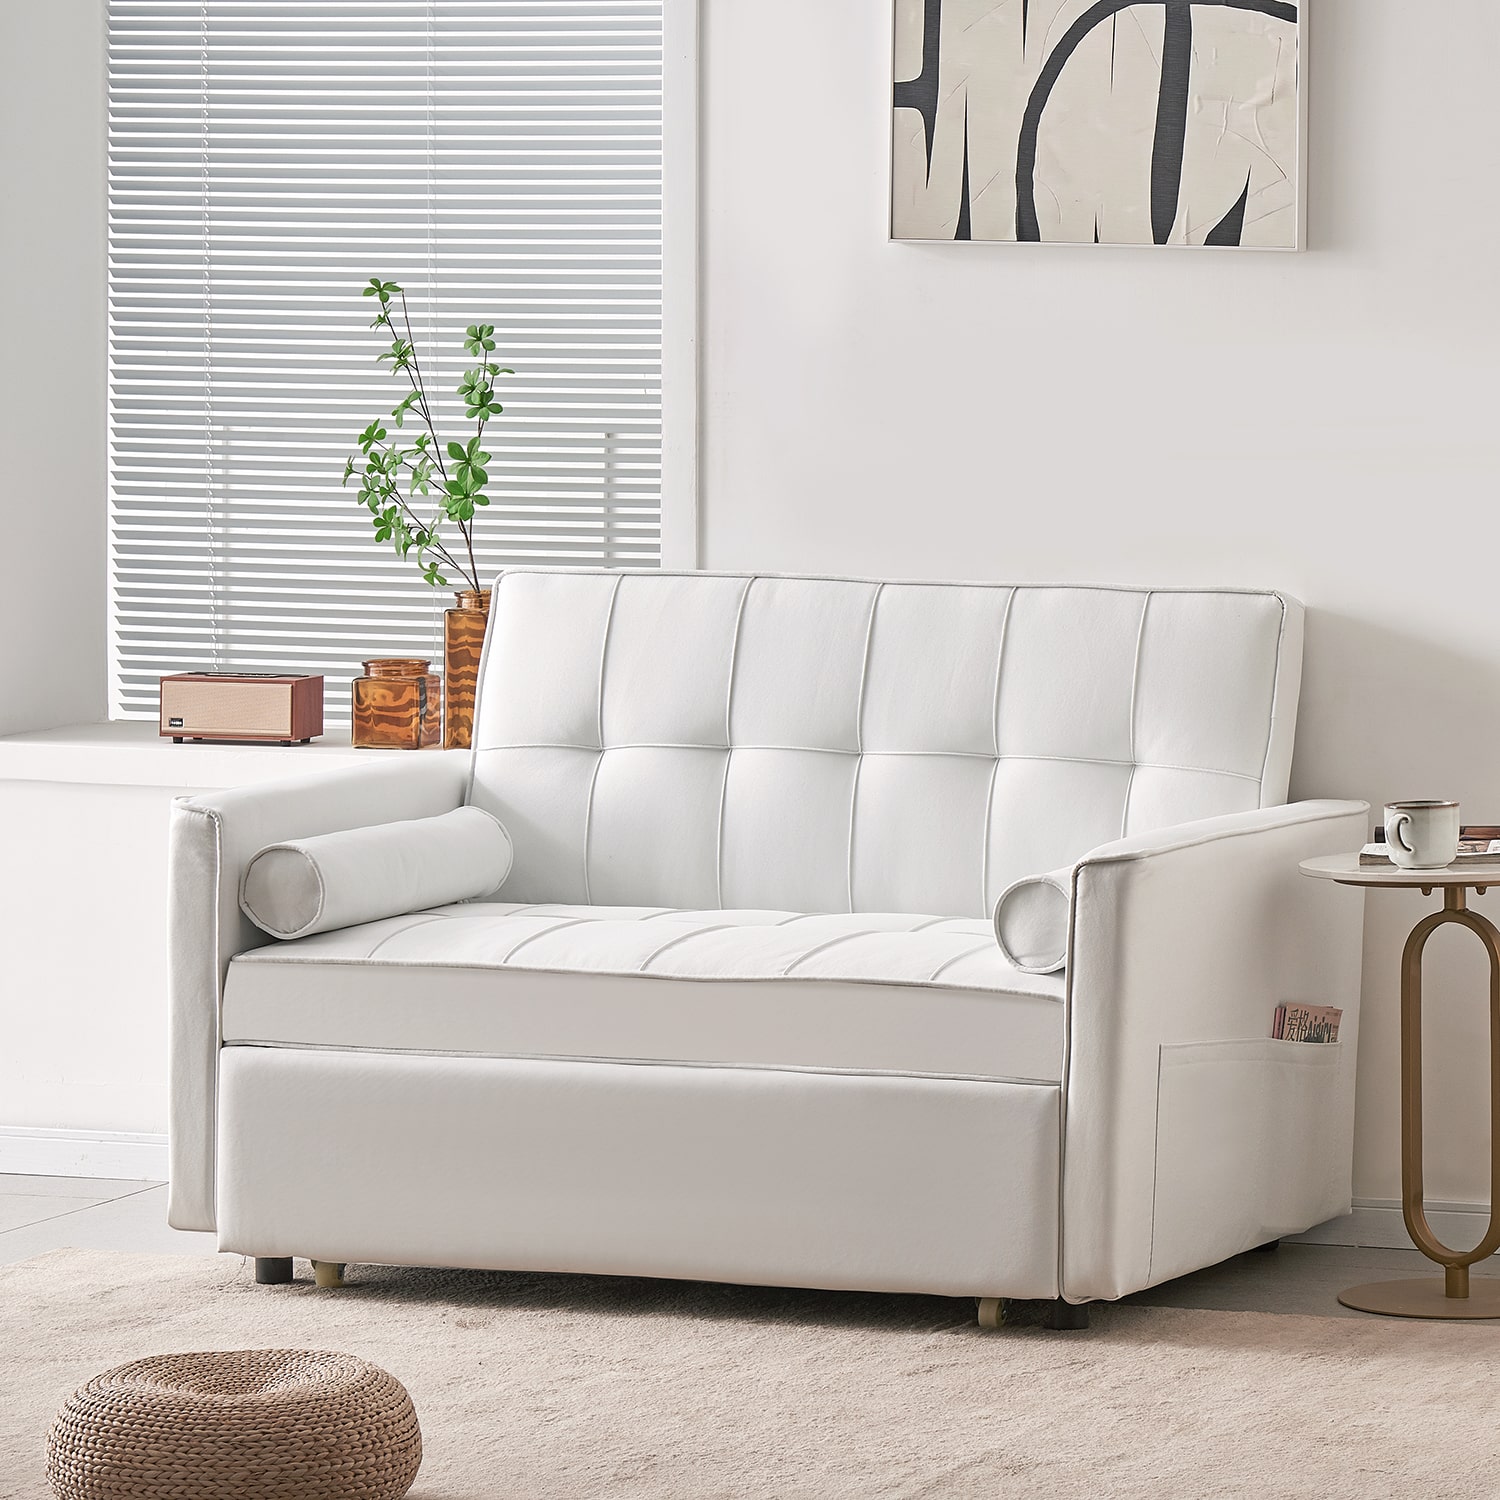 Genterson 2 Seater Sofabed White